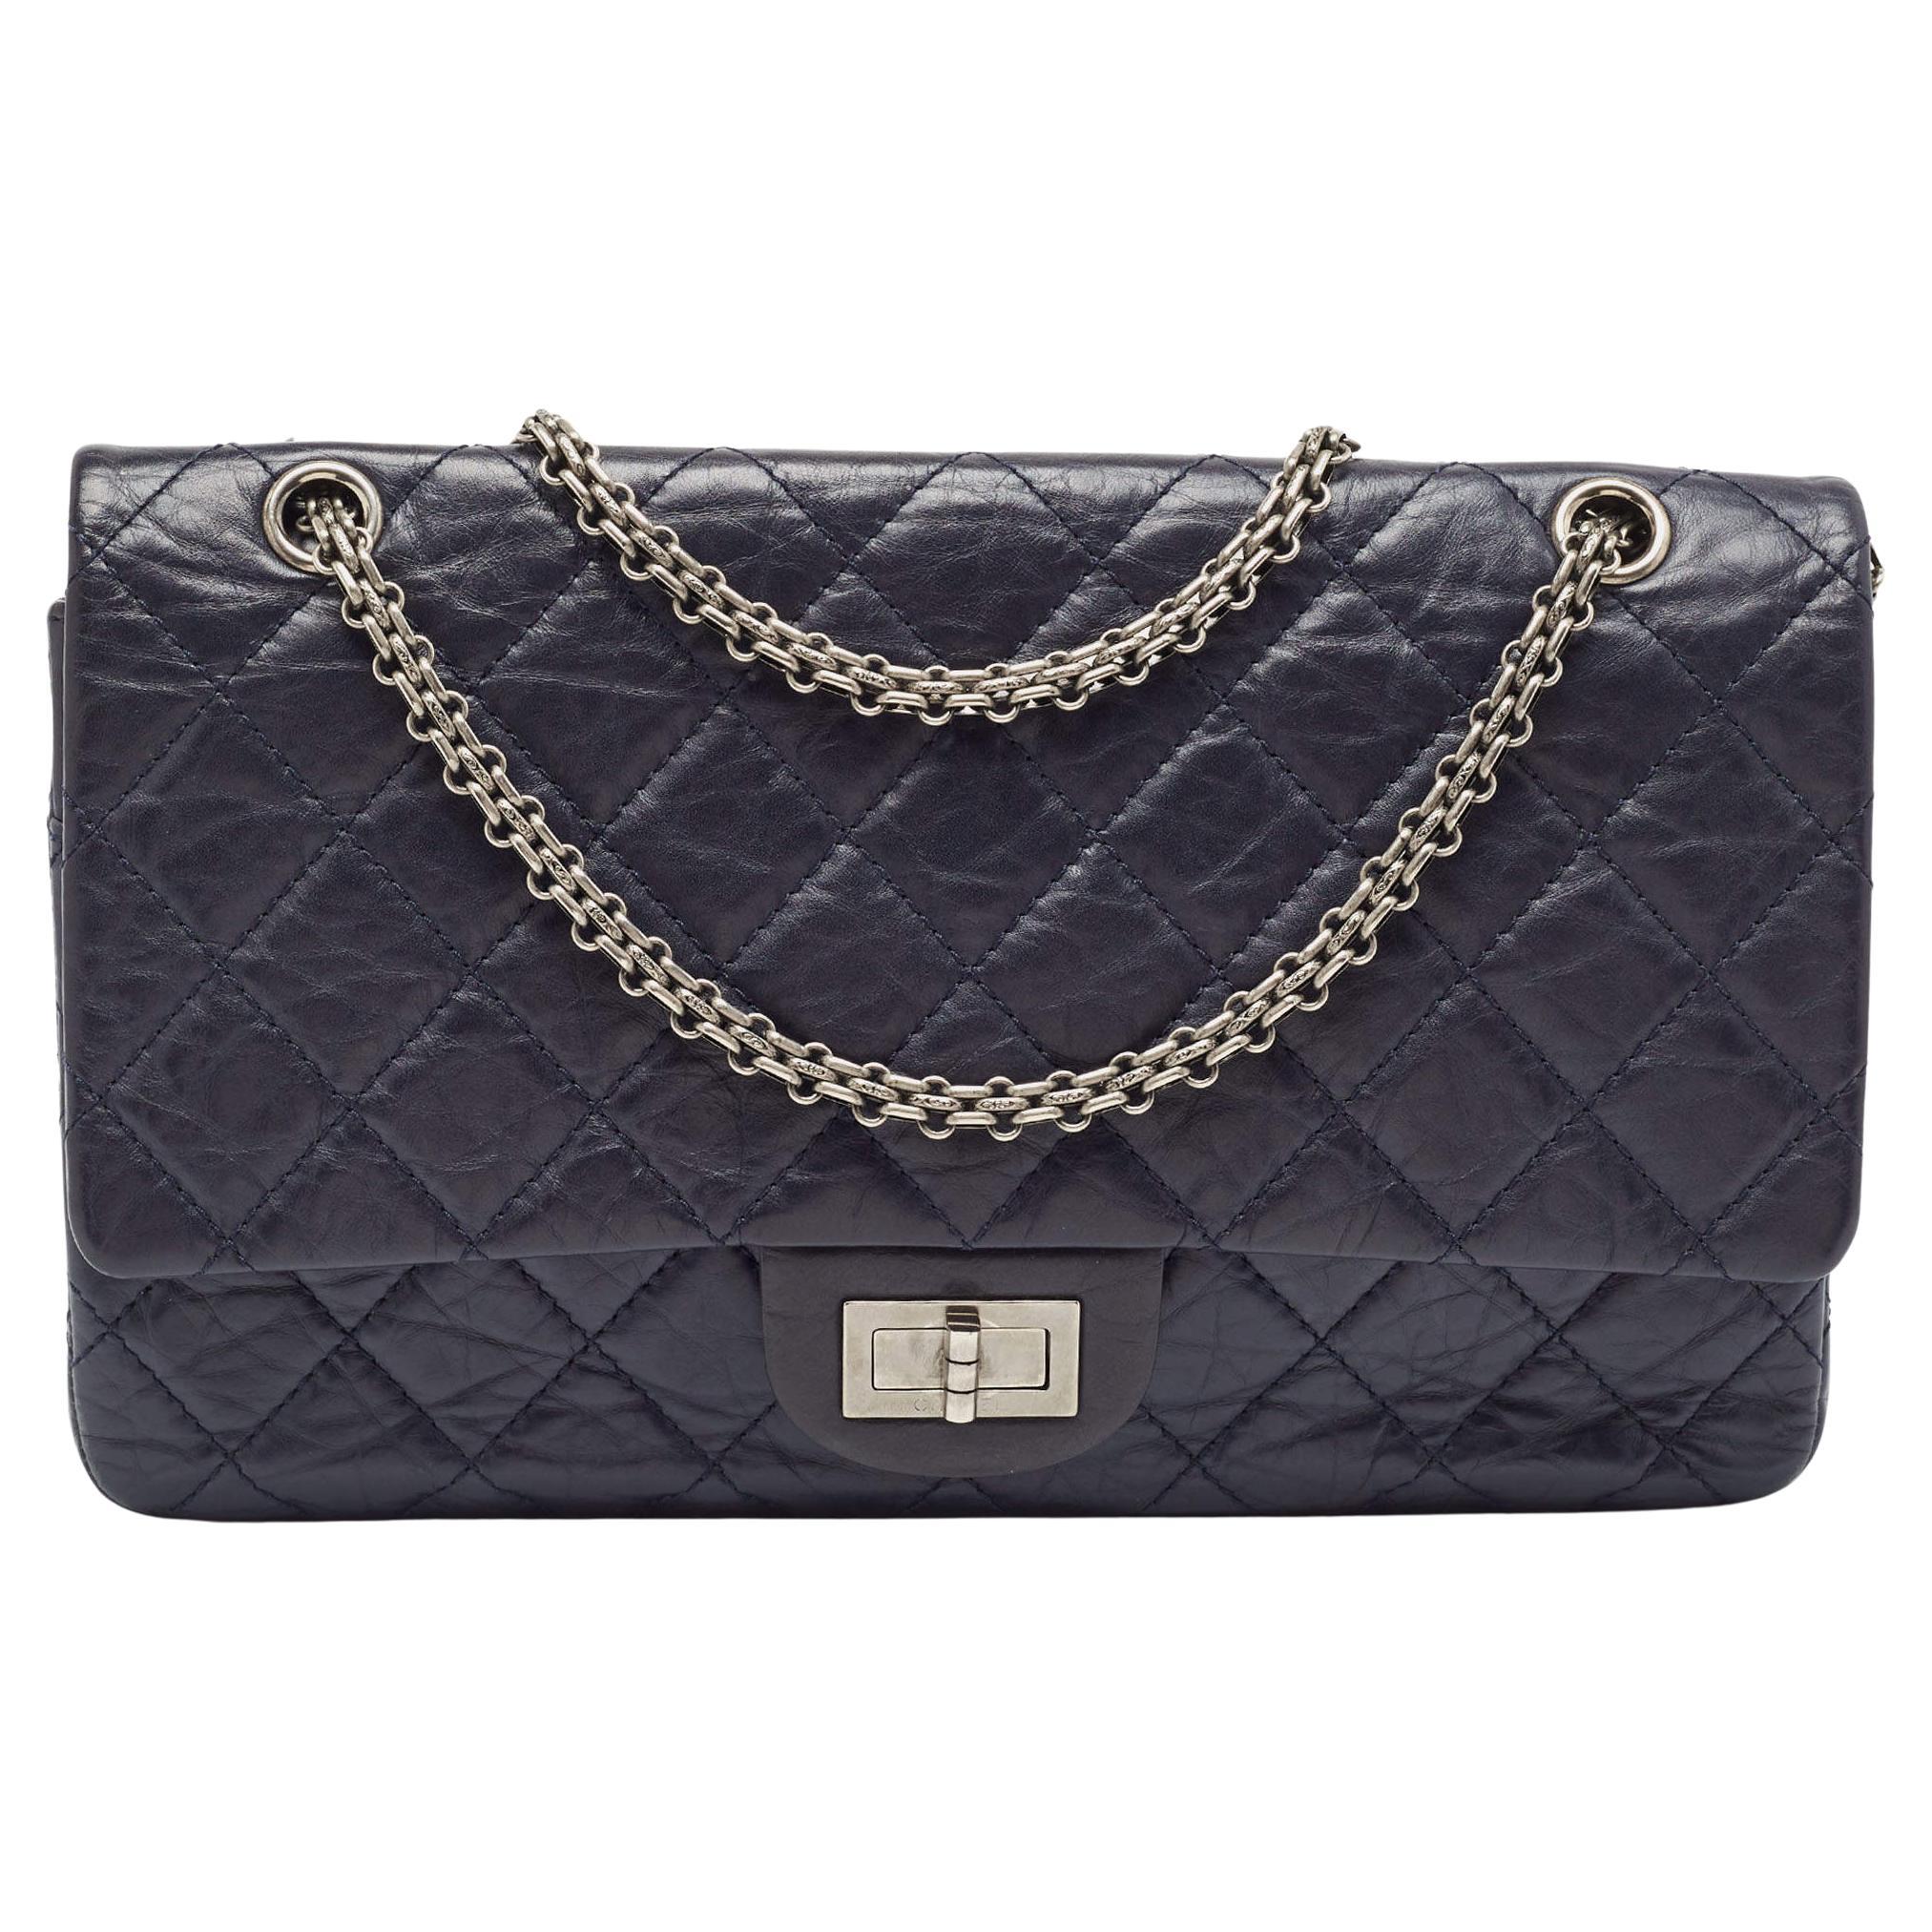 Chanel Navy Blue Quilted Aged Leather 227 Reissue 2.55 Flap Bag For Sale